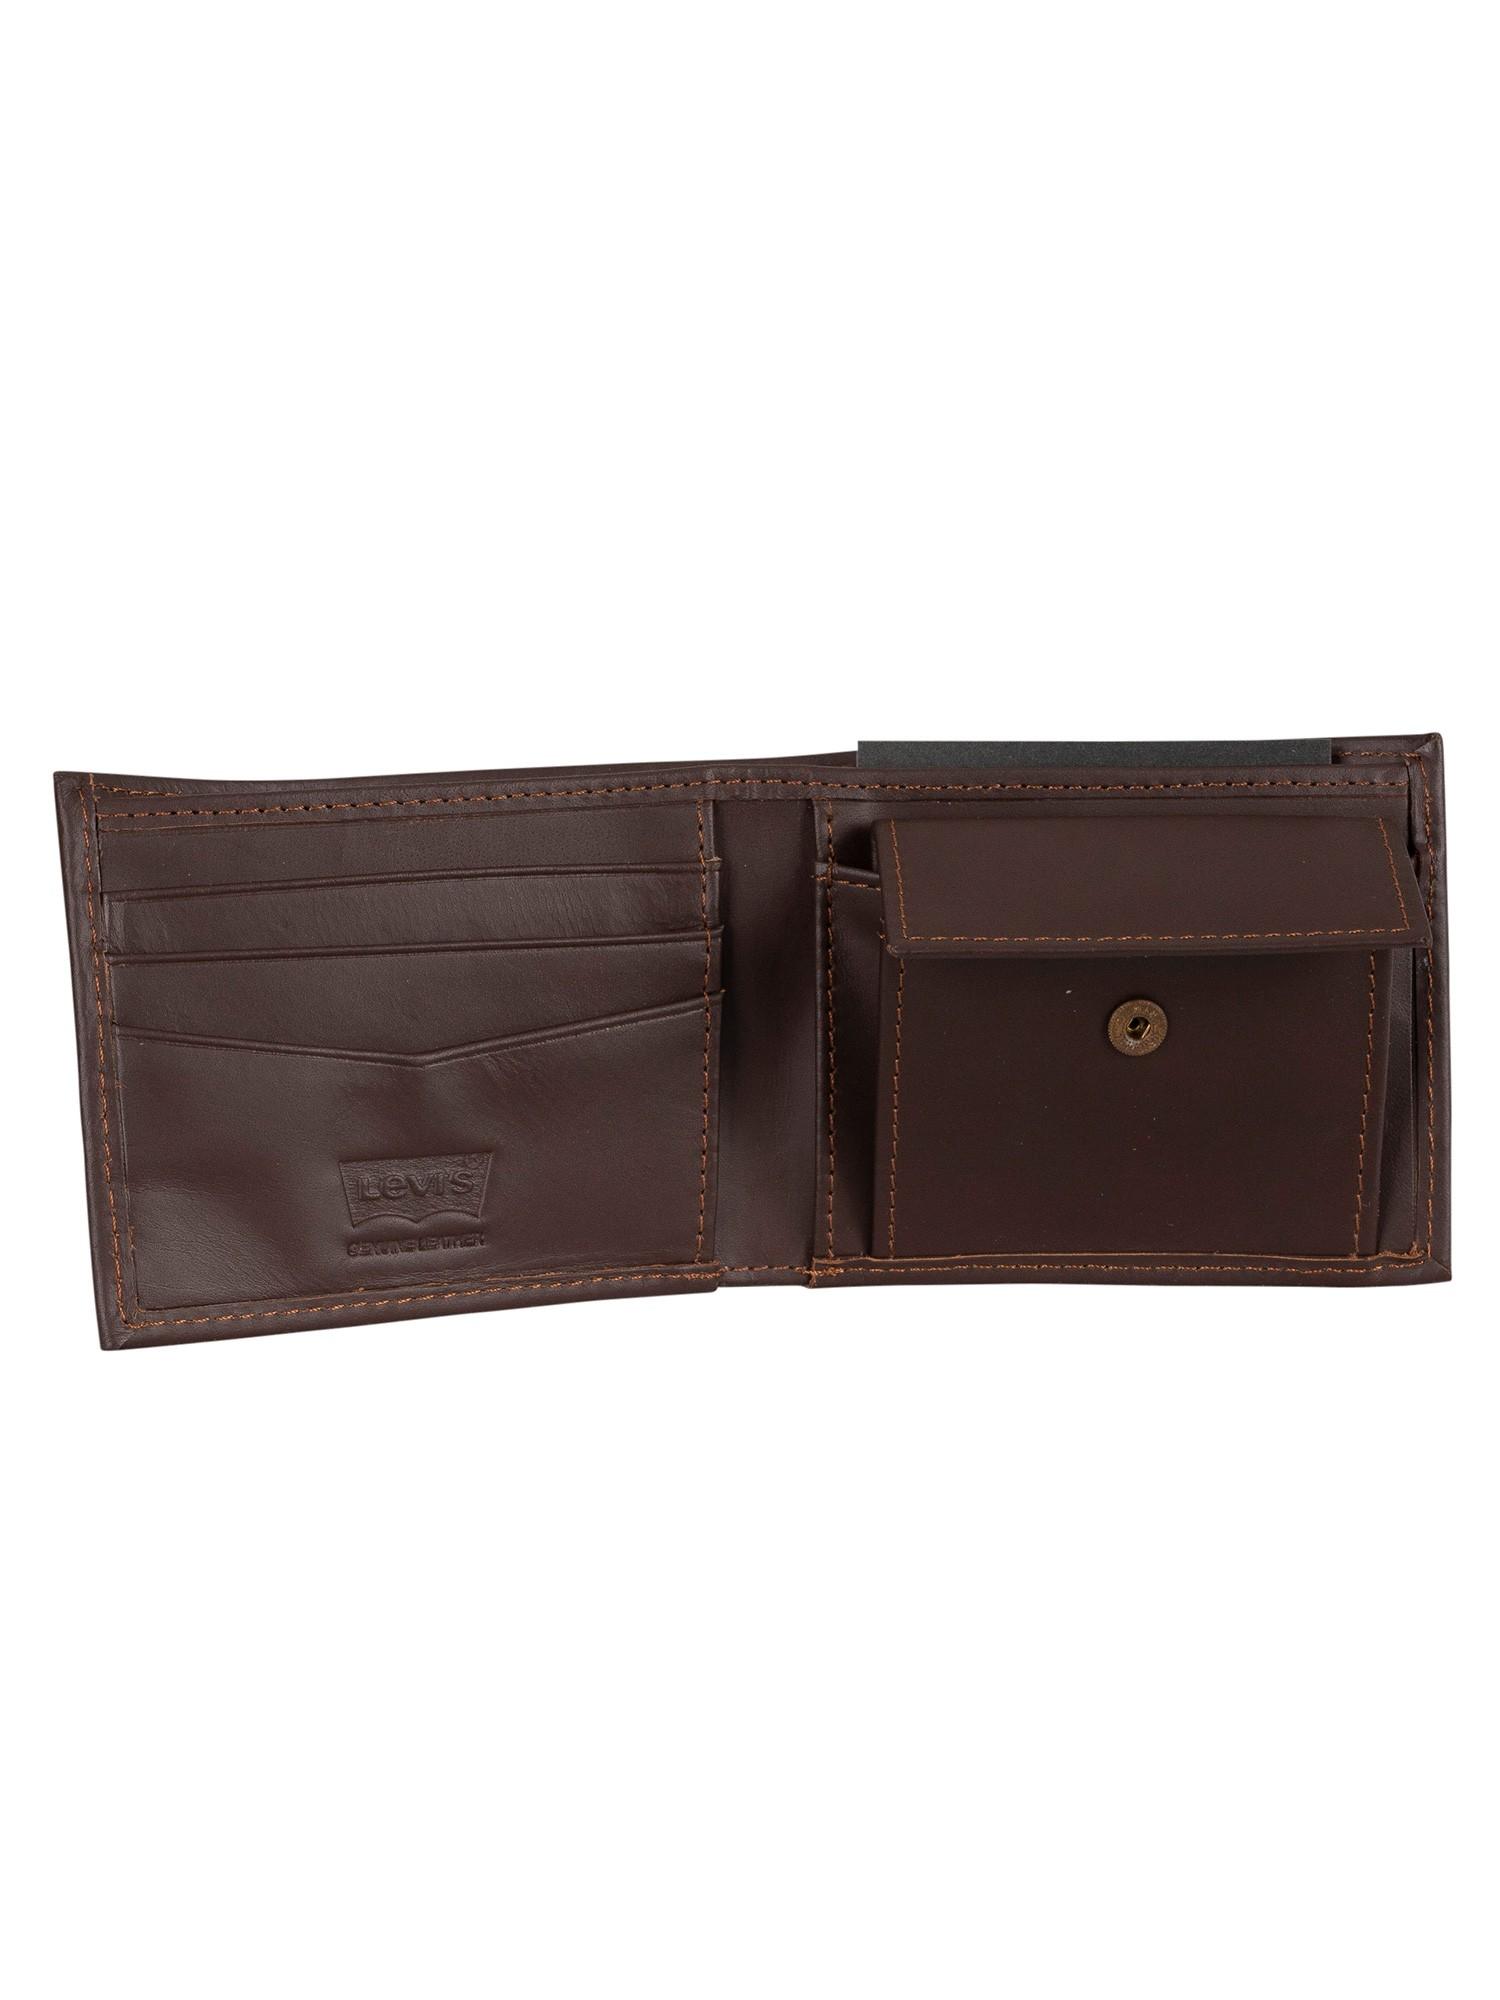 Levis leather wallet in tan | ASOS